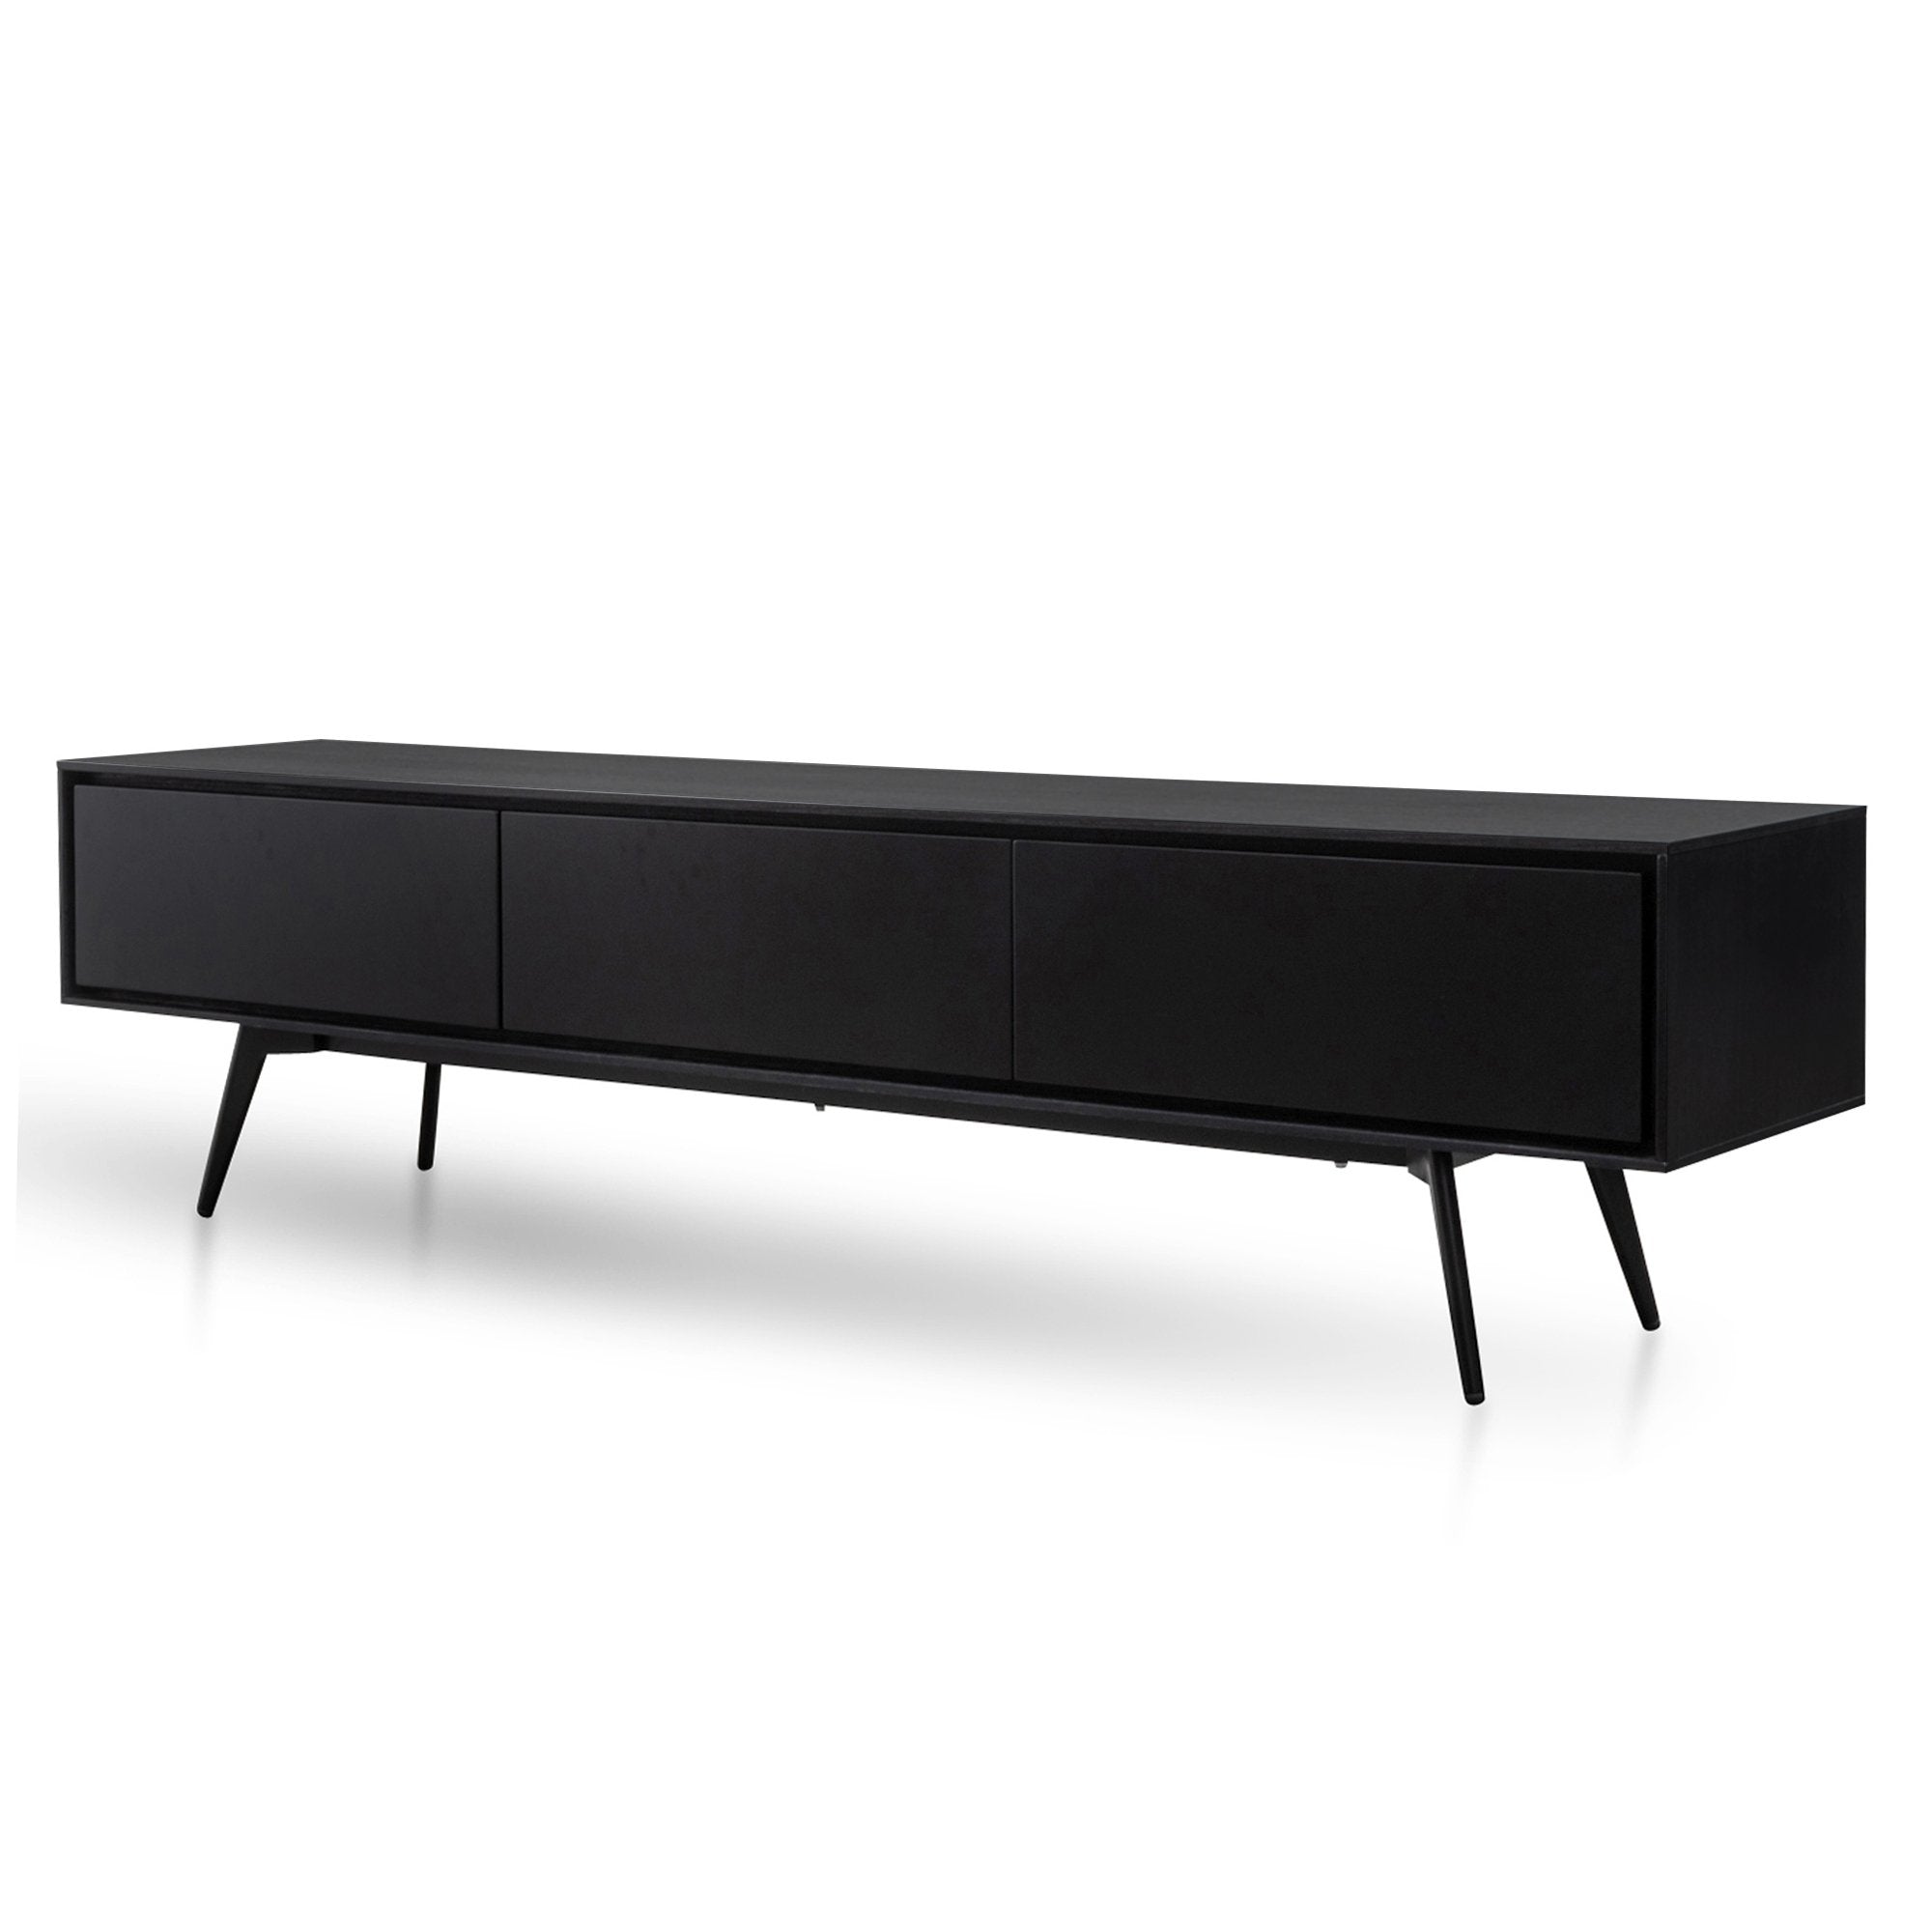 Logan Wooden TV Stand with Black Matte Drawers - Black - TV Units